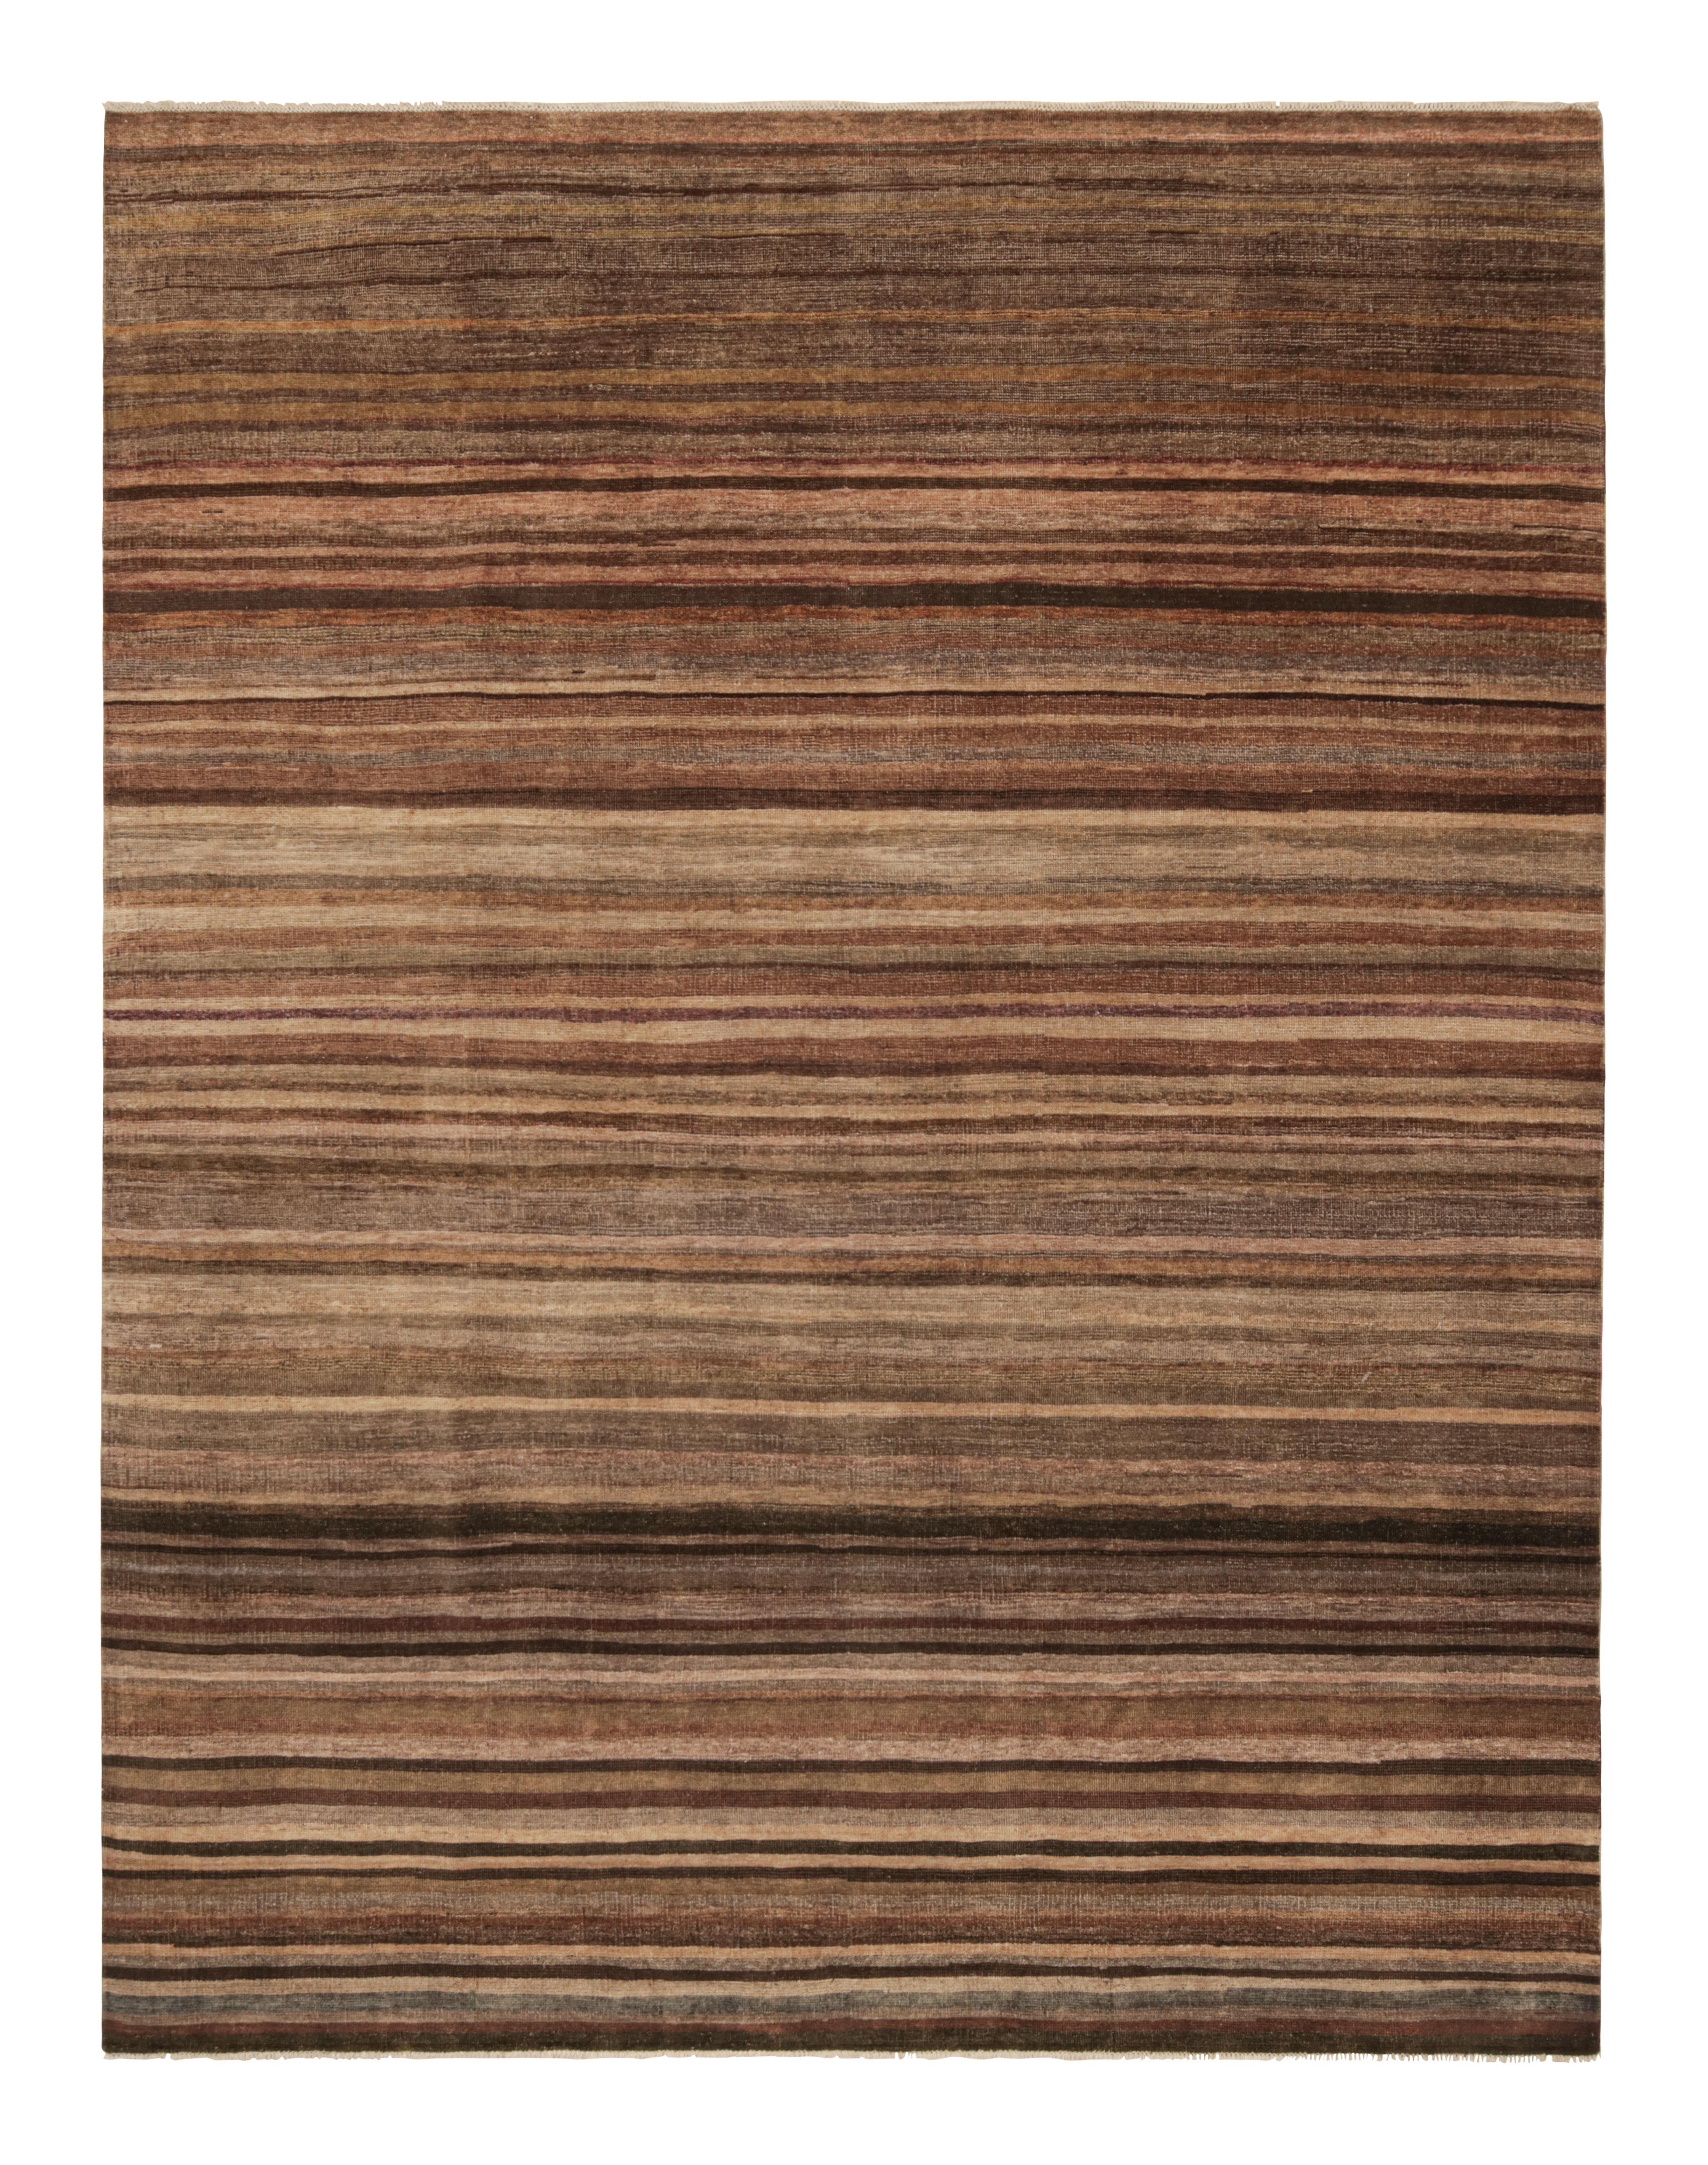 Indian Rug & Kilim’s Modern Textural Rug in Beige-Brown and Umber Stripes and Striae For Sale